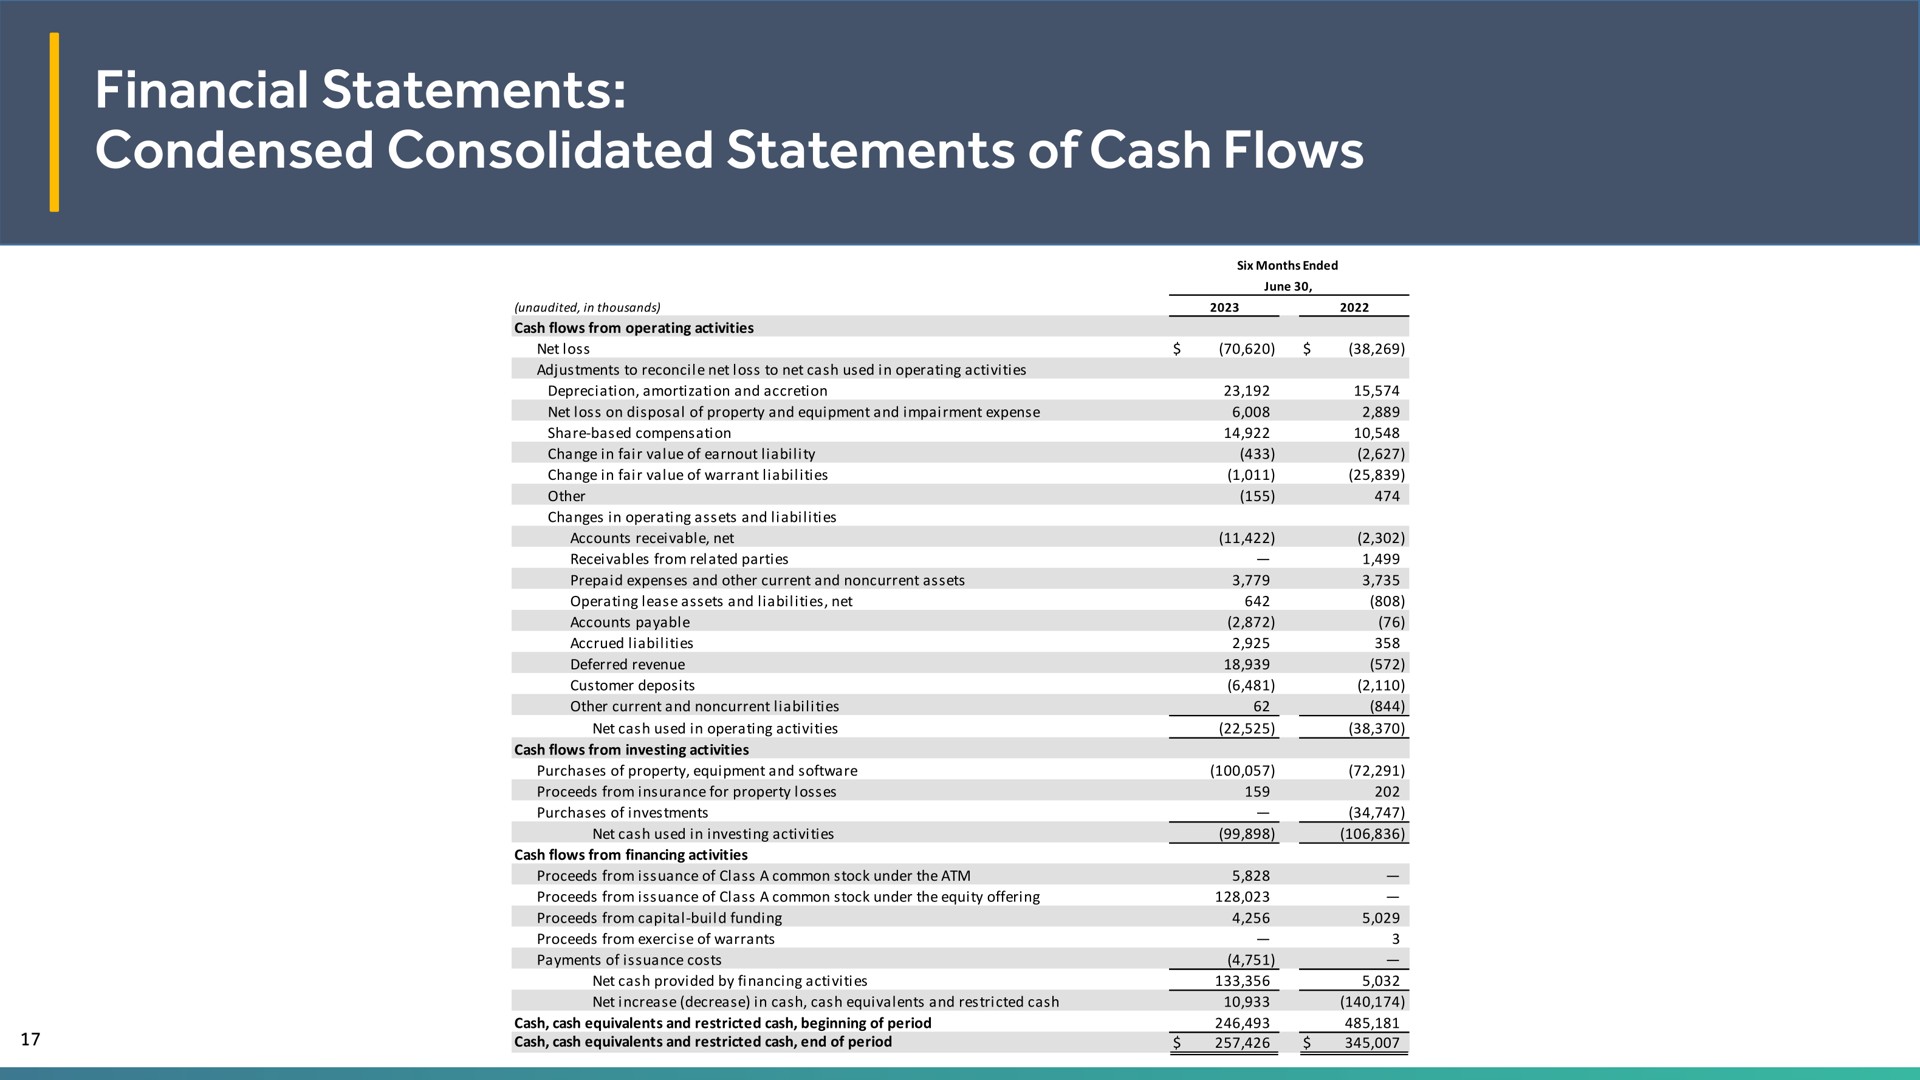 financial statements condensed consolidated statements of cash flows | EVgo